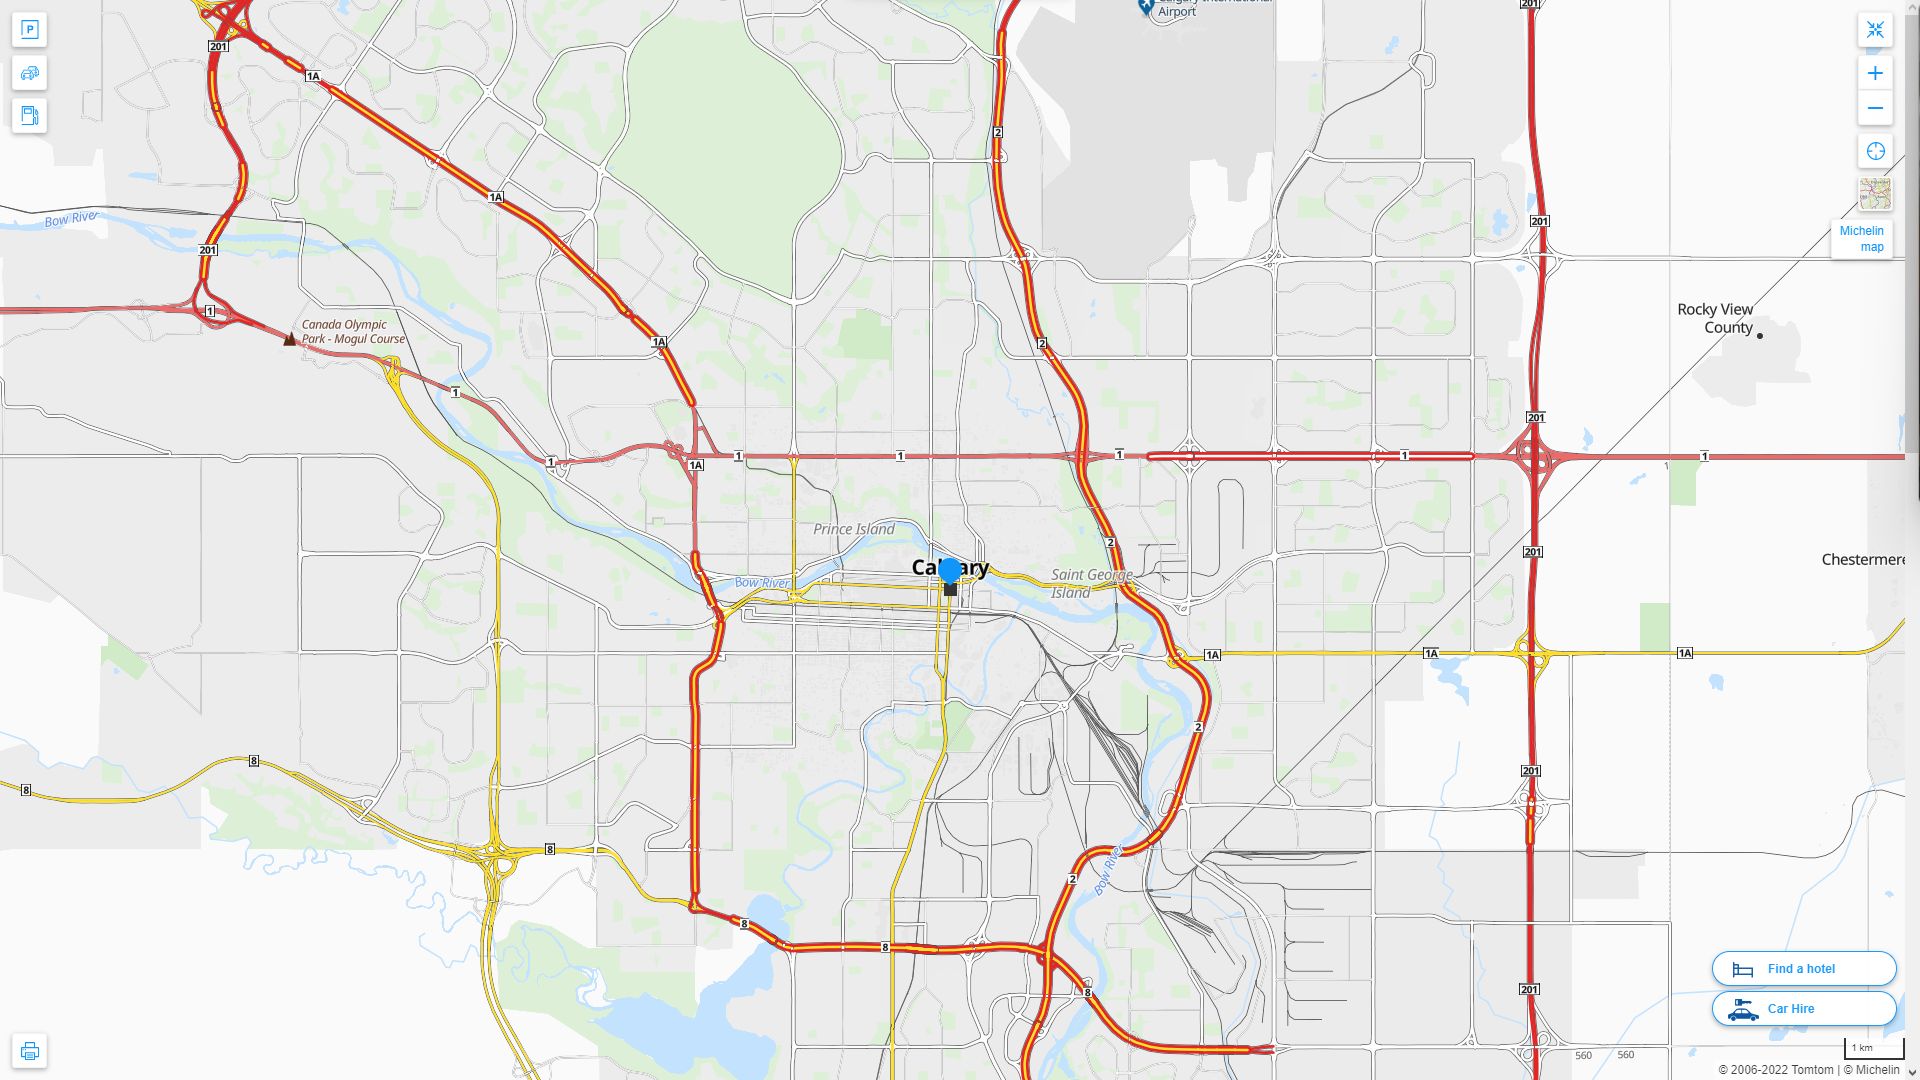 Calgary Highway and Road Map